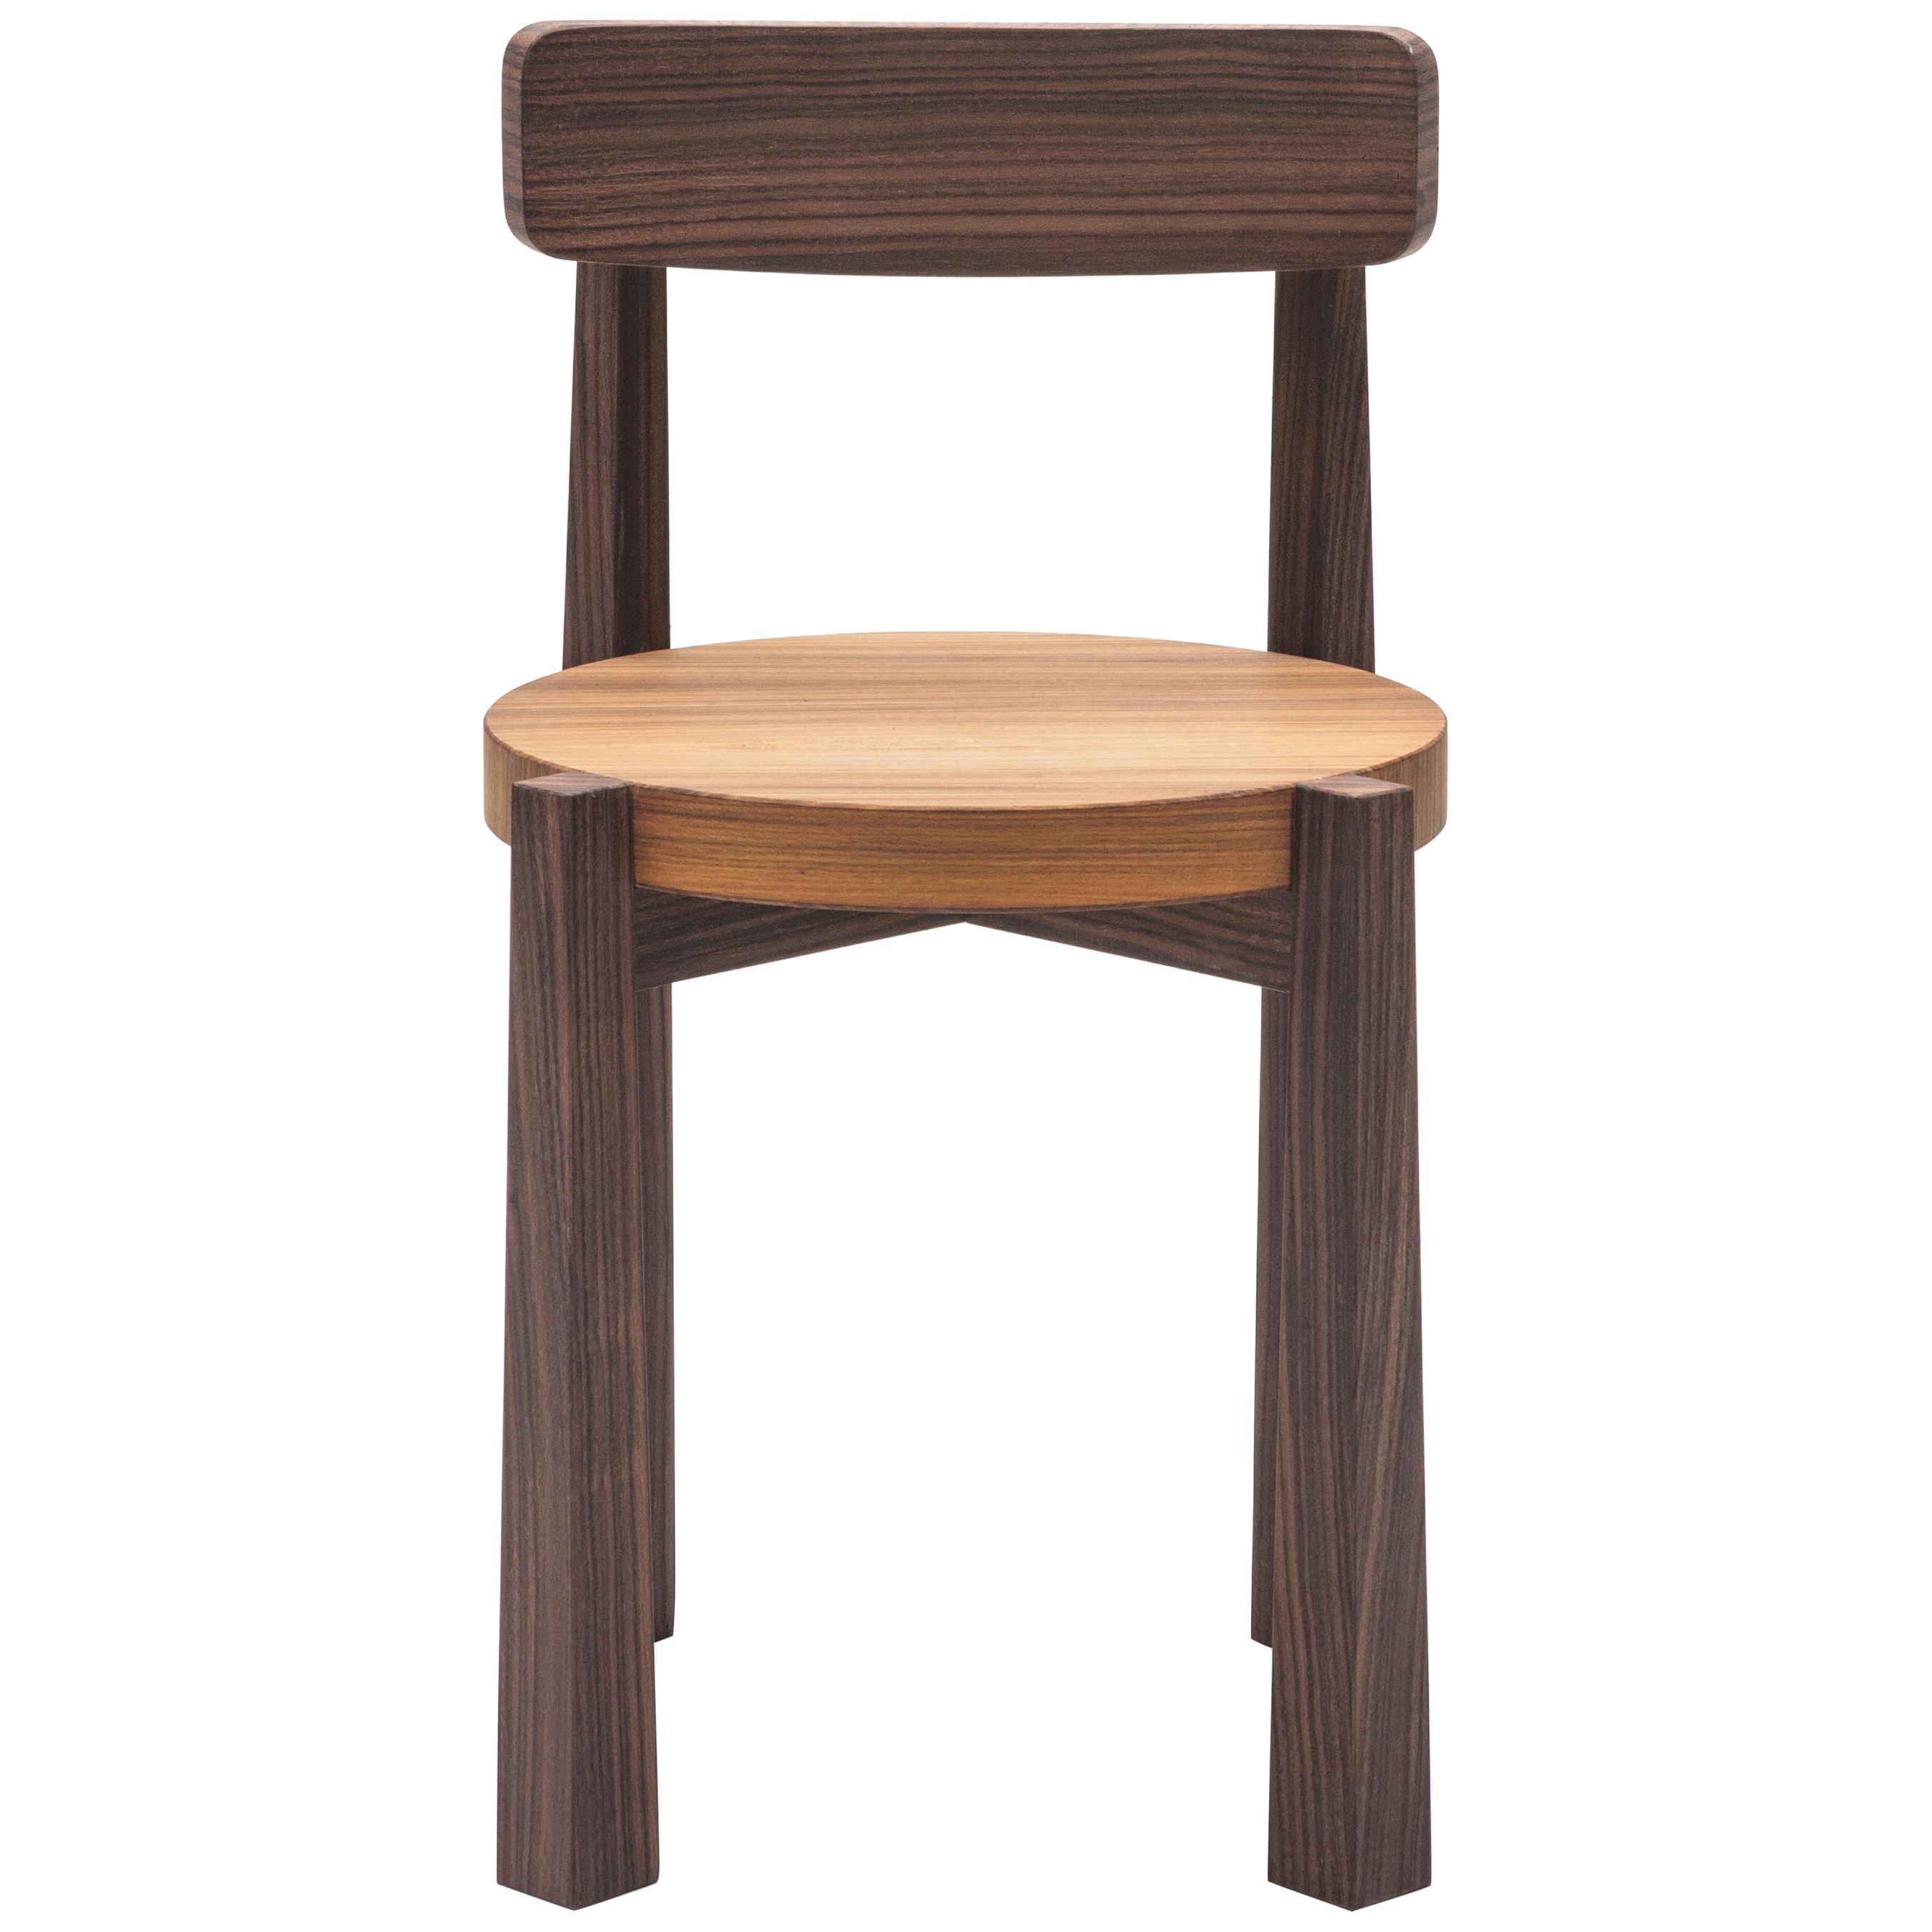 Handmade Bespoke Wooden Dining Chair Sediolina For Sale